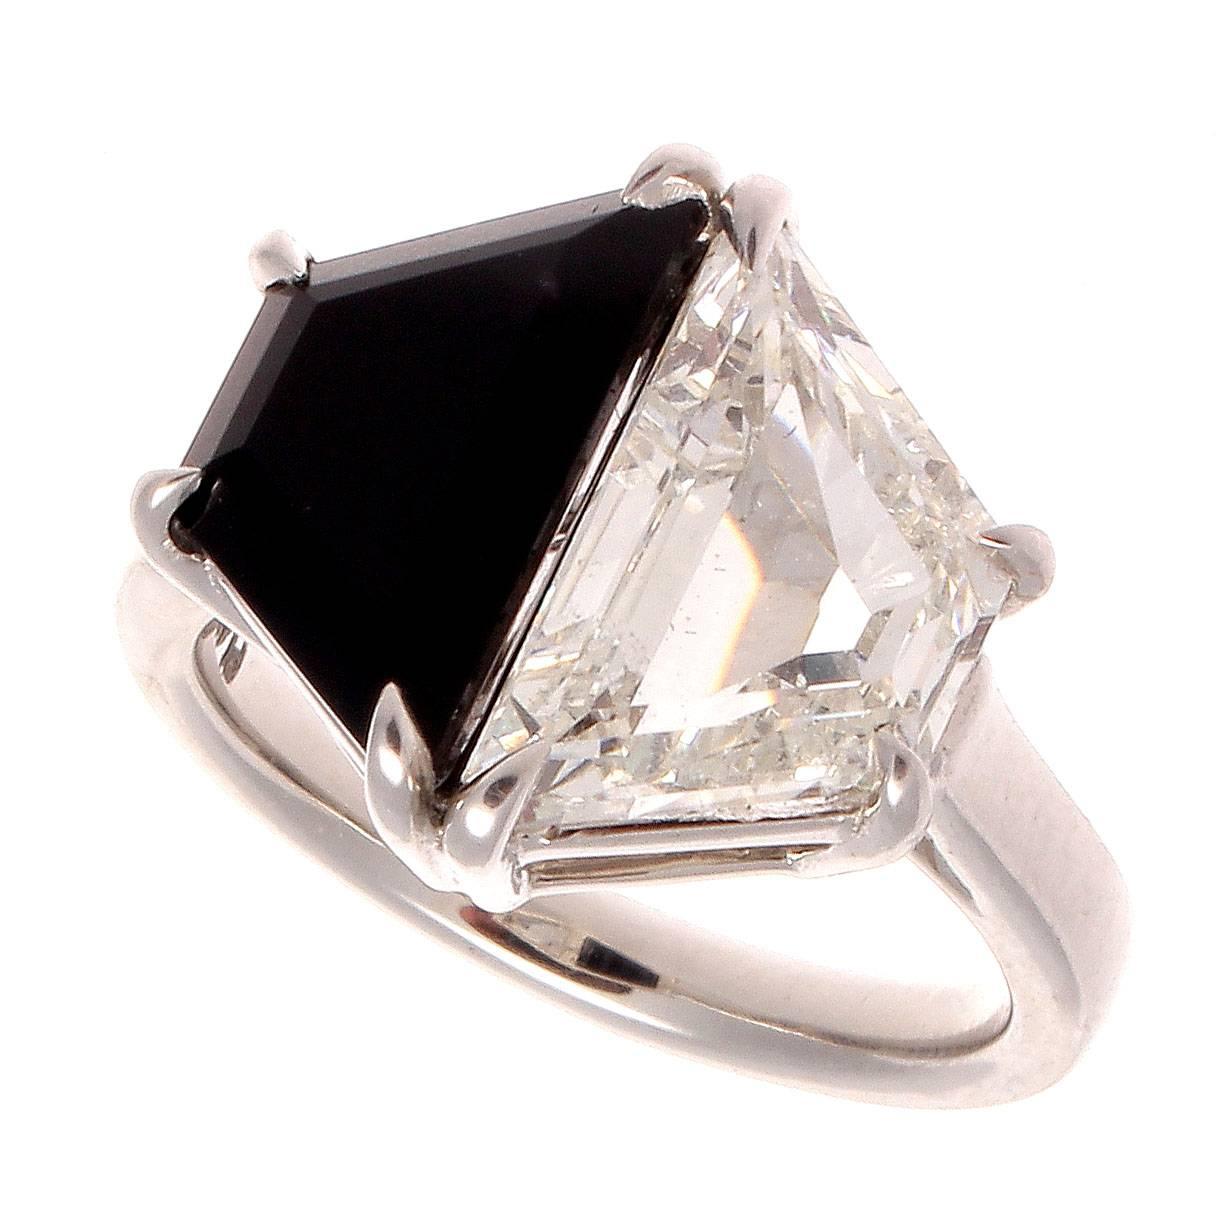 A modern creation of old world brilliance. The perfectly symmetrical design is reminiscent of the easily identifiable Art Deco ideology and elegance. Featuring a 2.27 carat GIA certified J color, SI2 clarity trapezoidal cut diamond that is perfectly